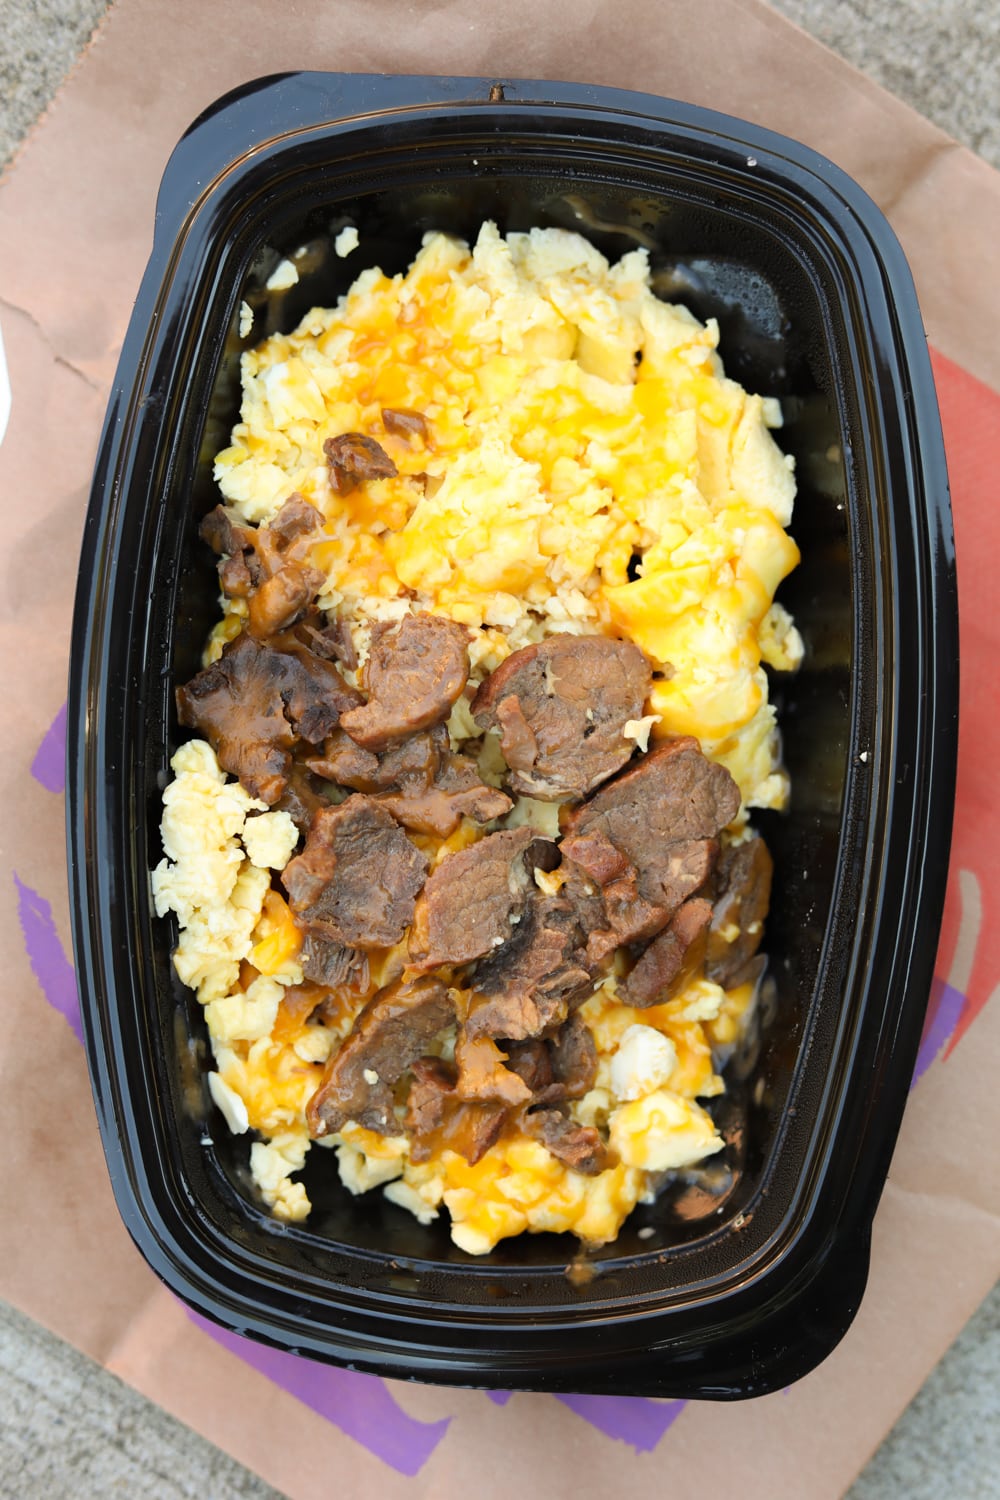 A black container with steak, egg, and cheese in it. The container is on a brown paper bag.